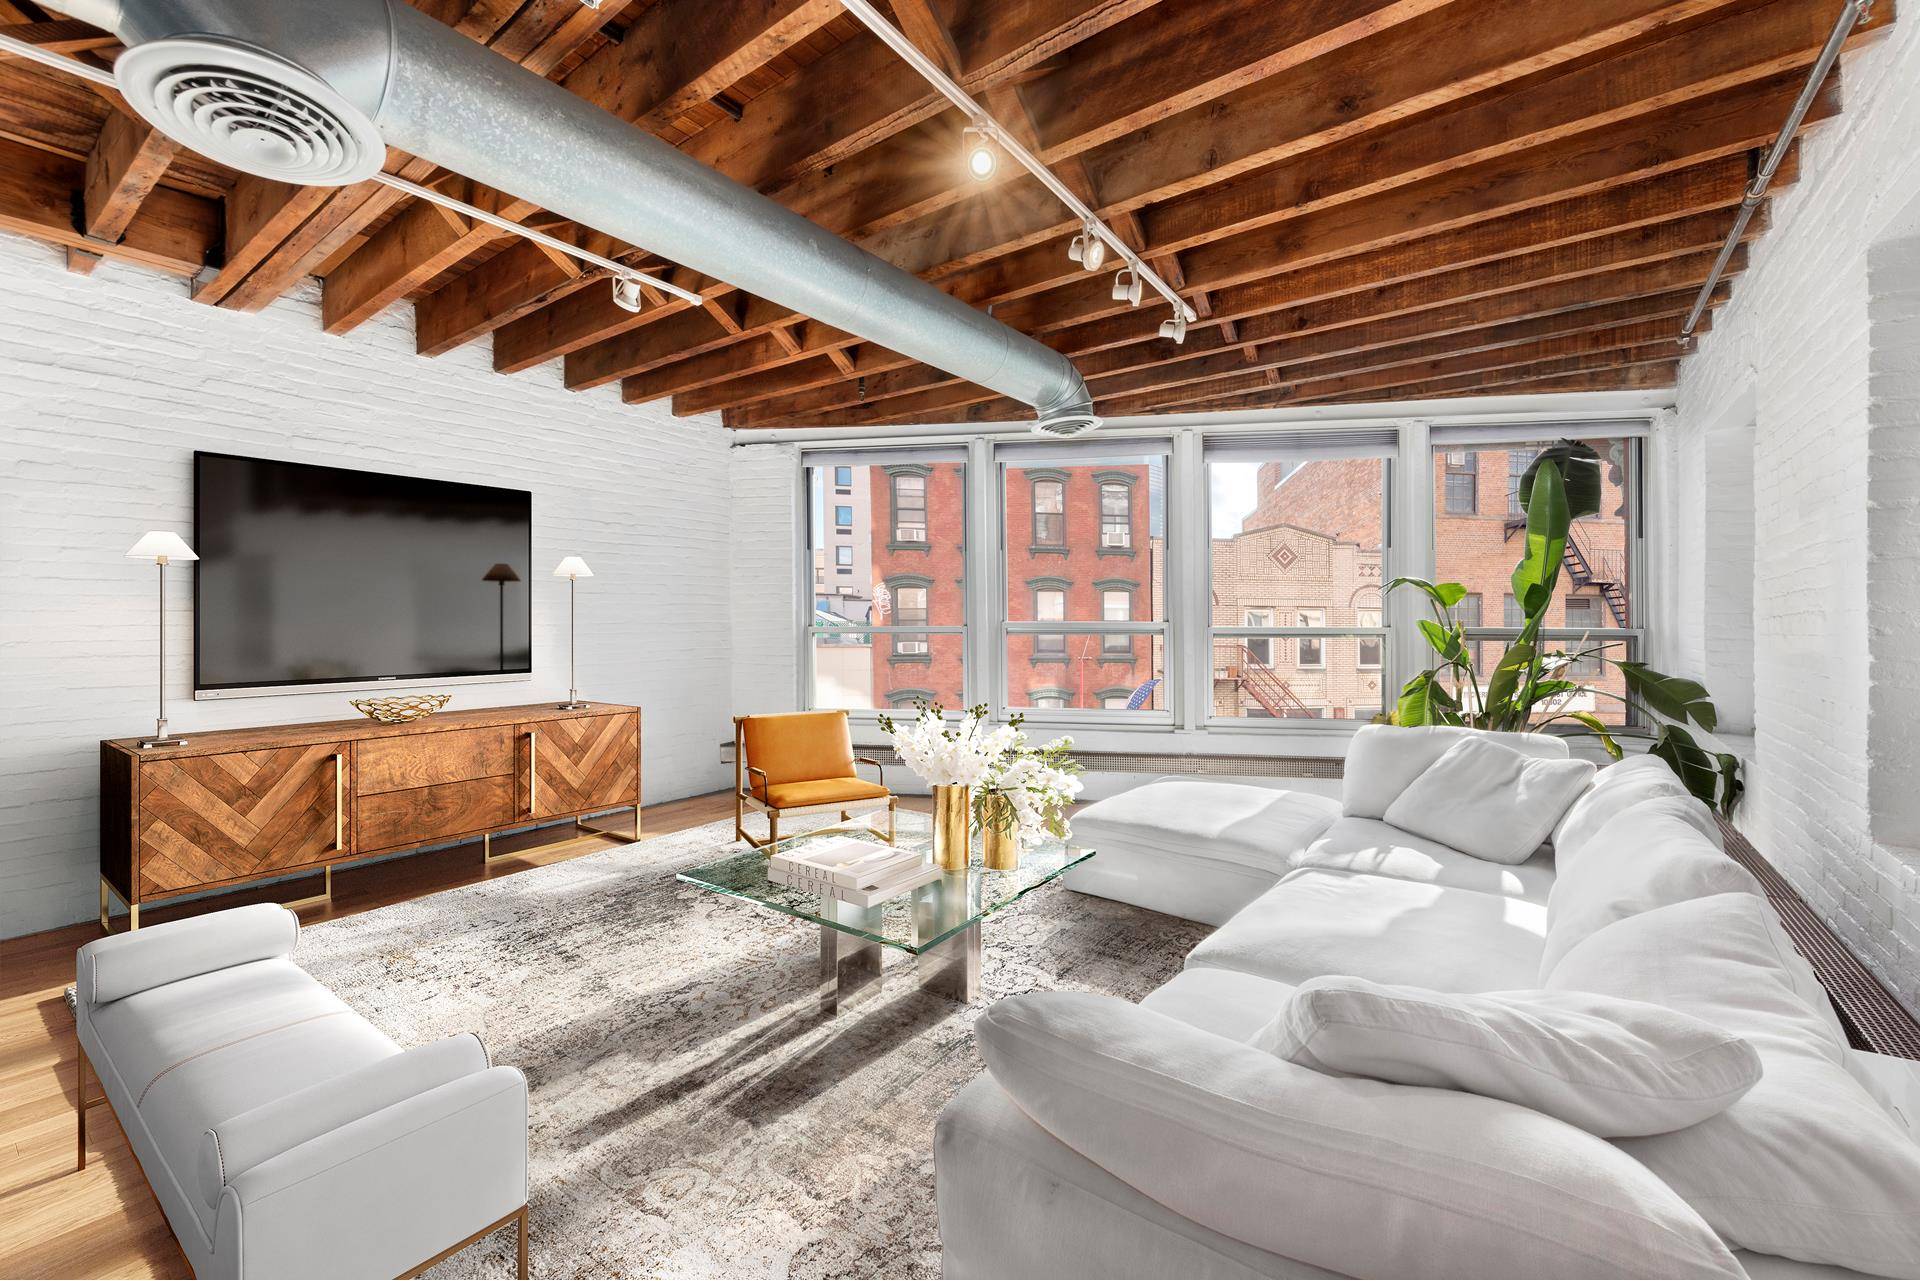 Introducing this true oversized 1 bedroom, 2 bathrooms artist loft located in one of the most stylish neighborhoods of Manhattan.